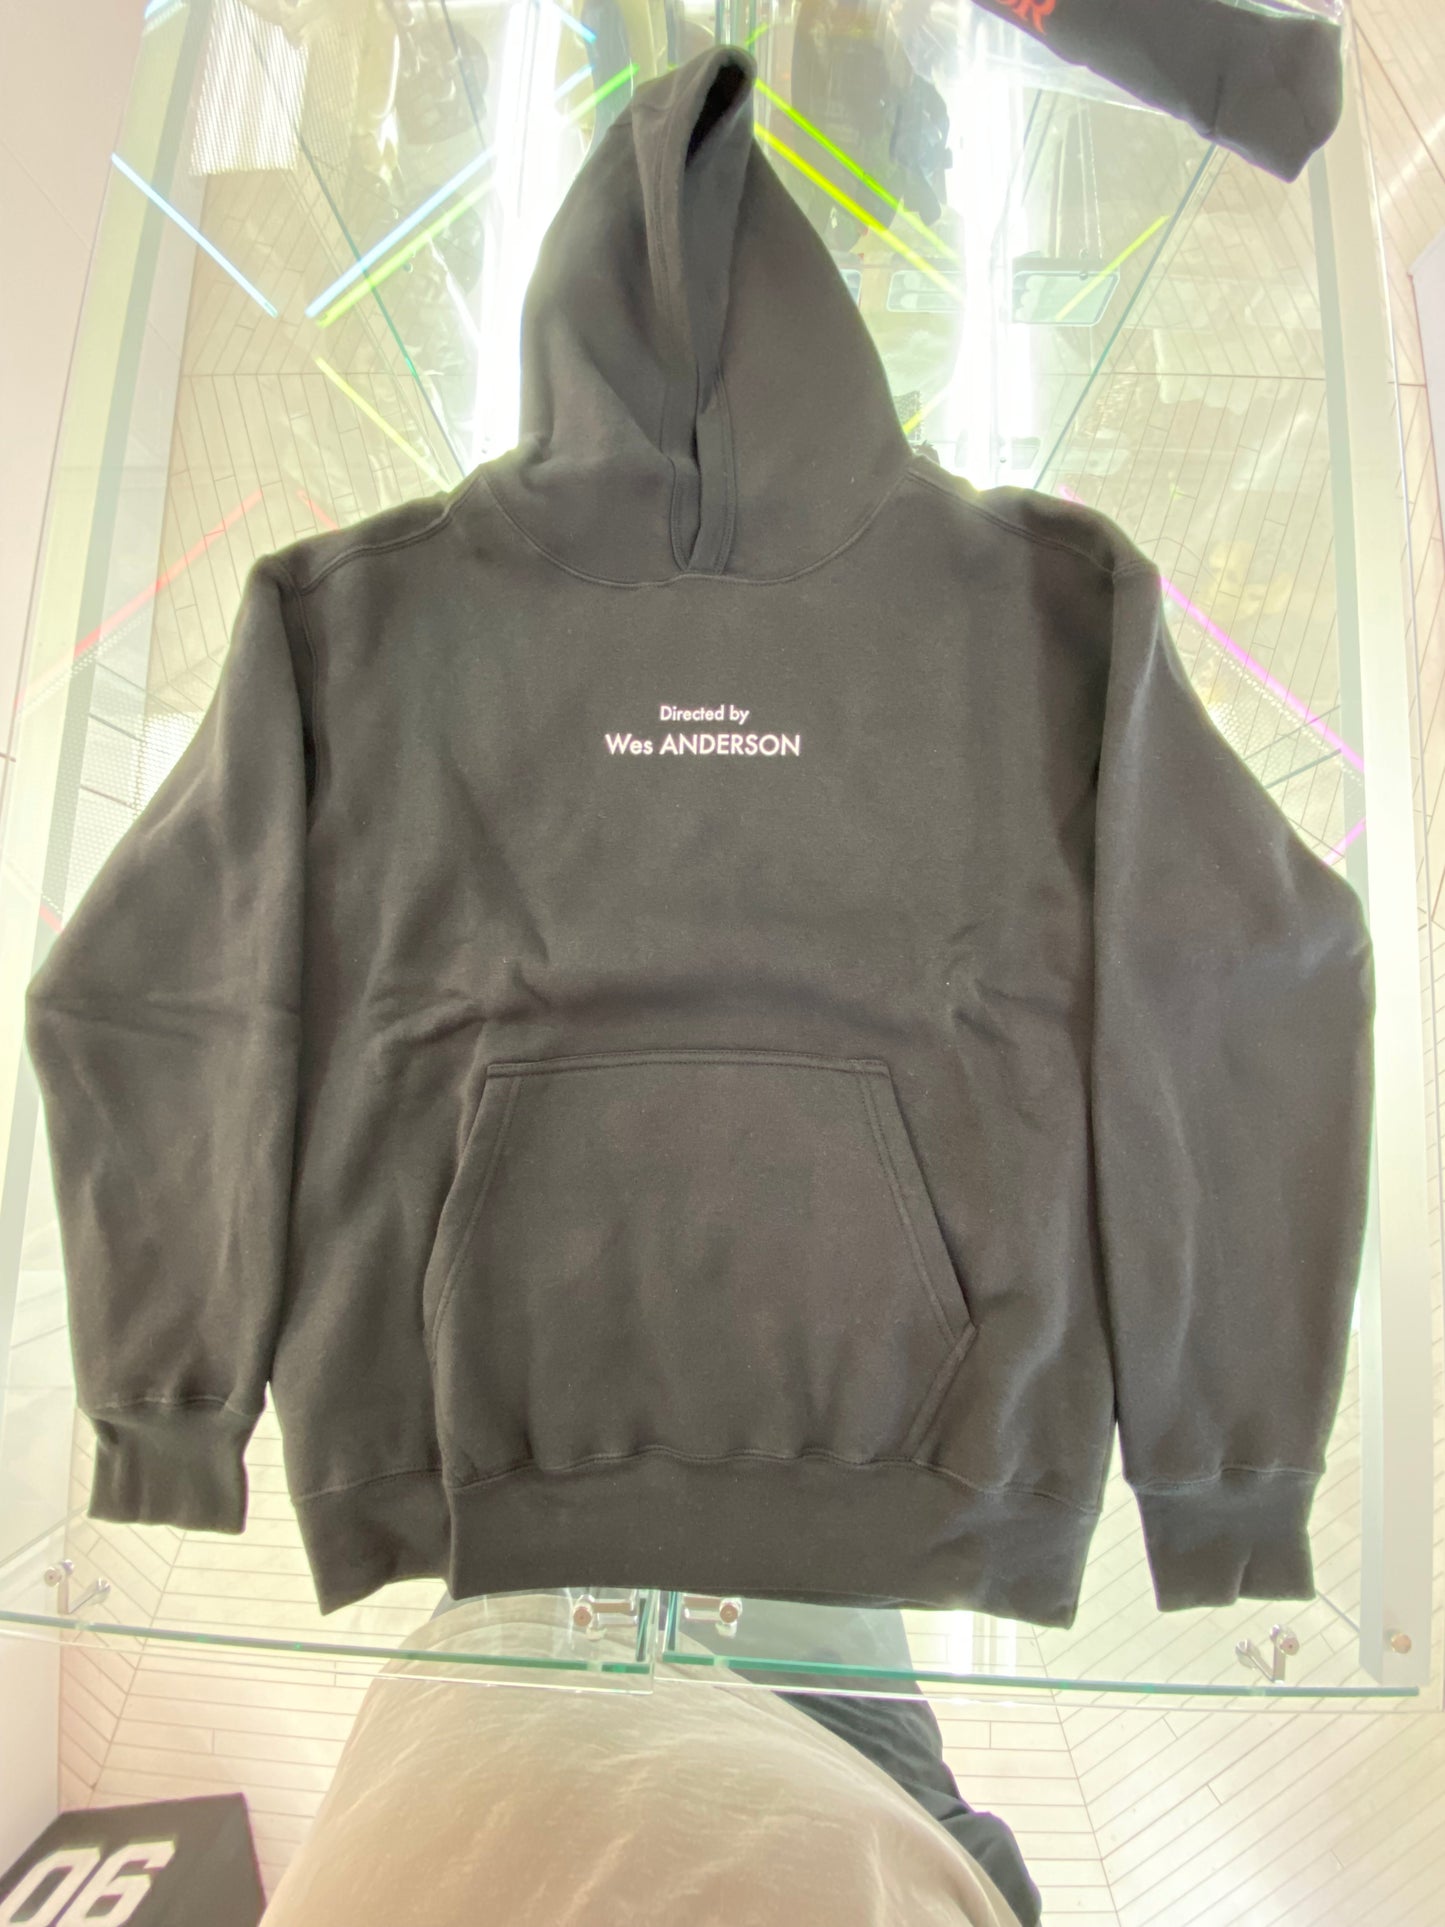 OB Wes Anderson made it hoodie